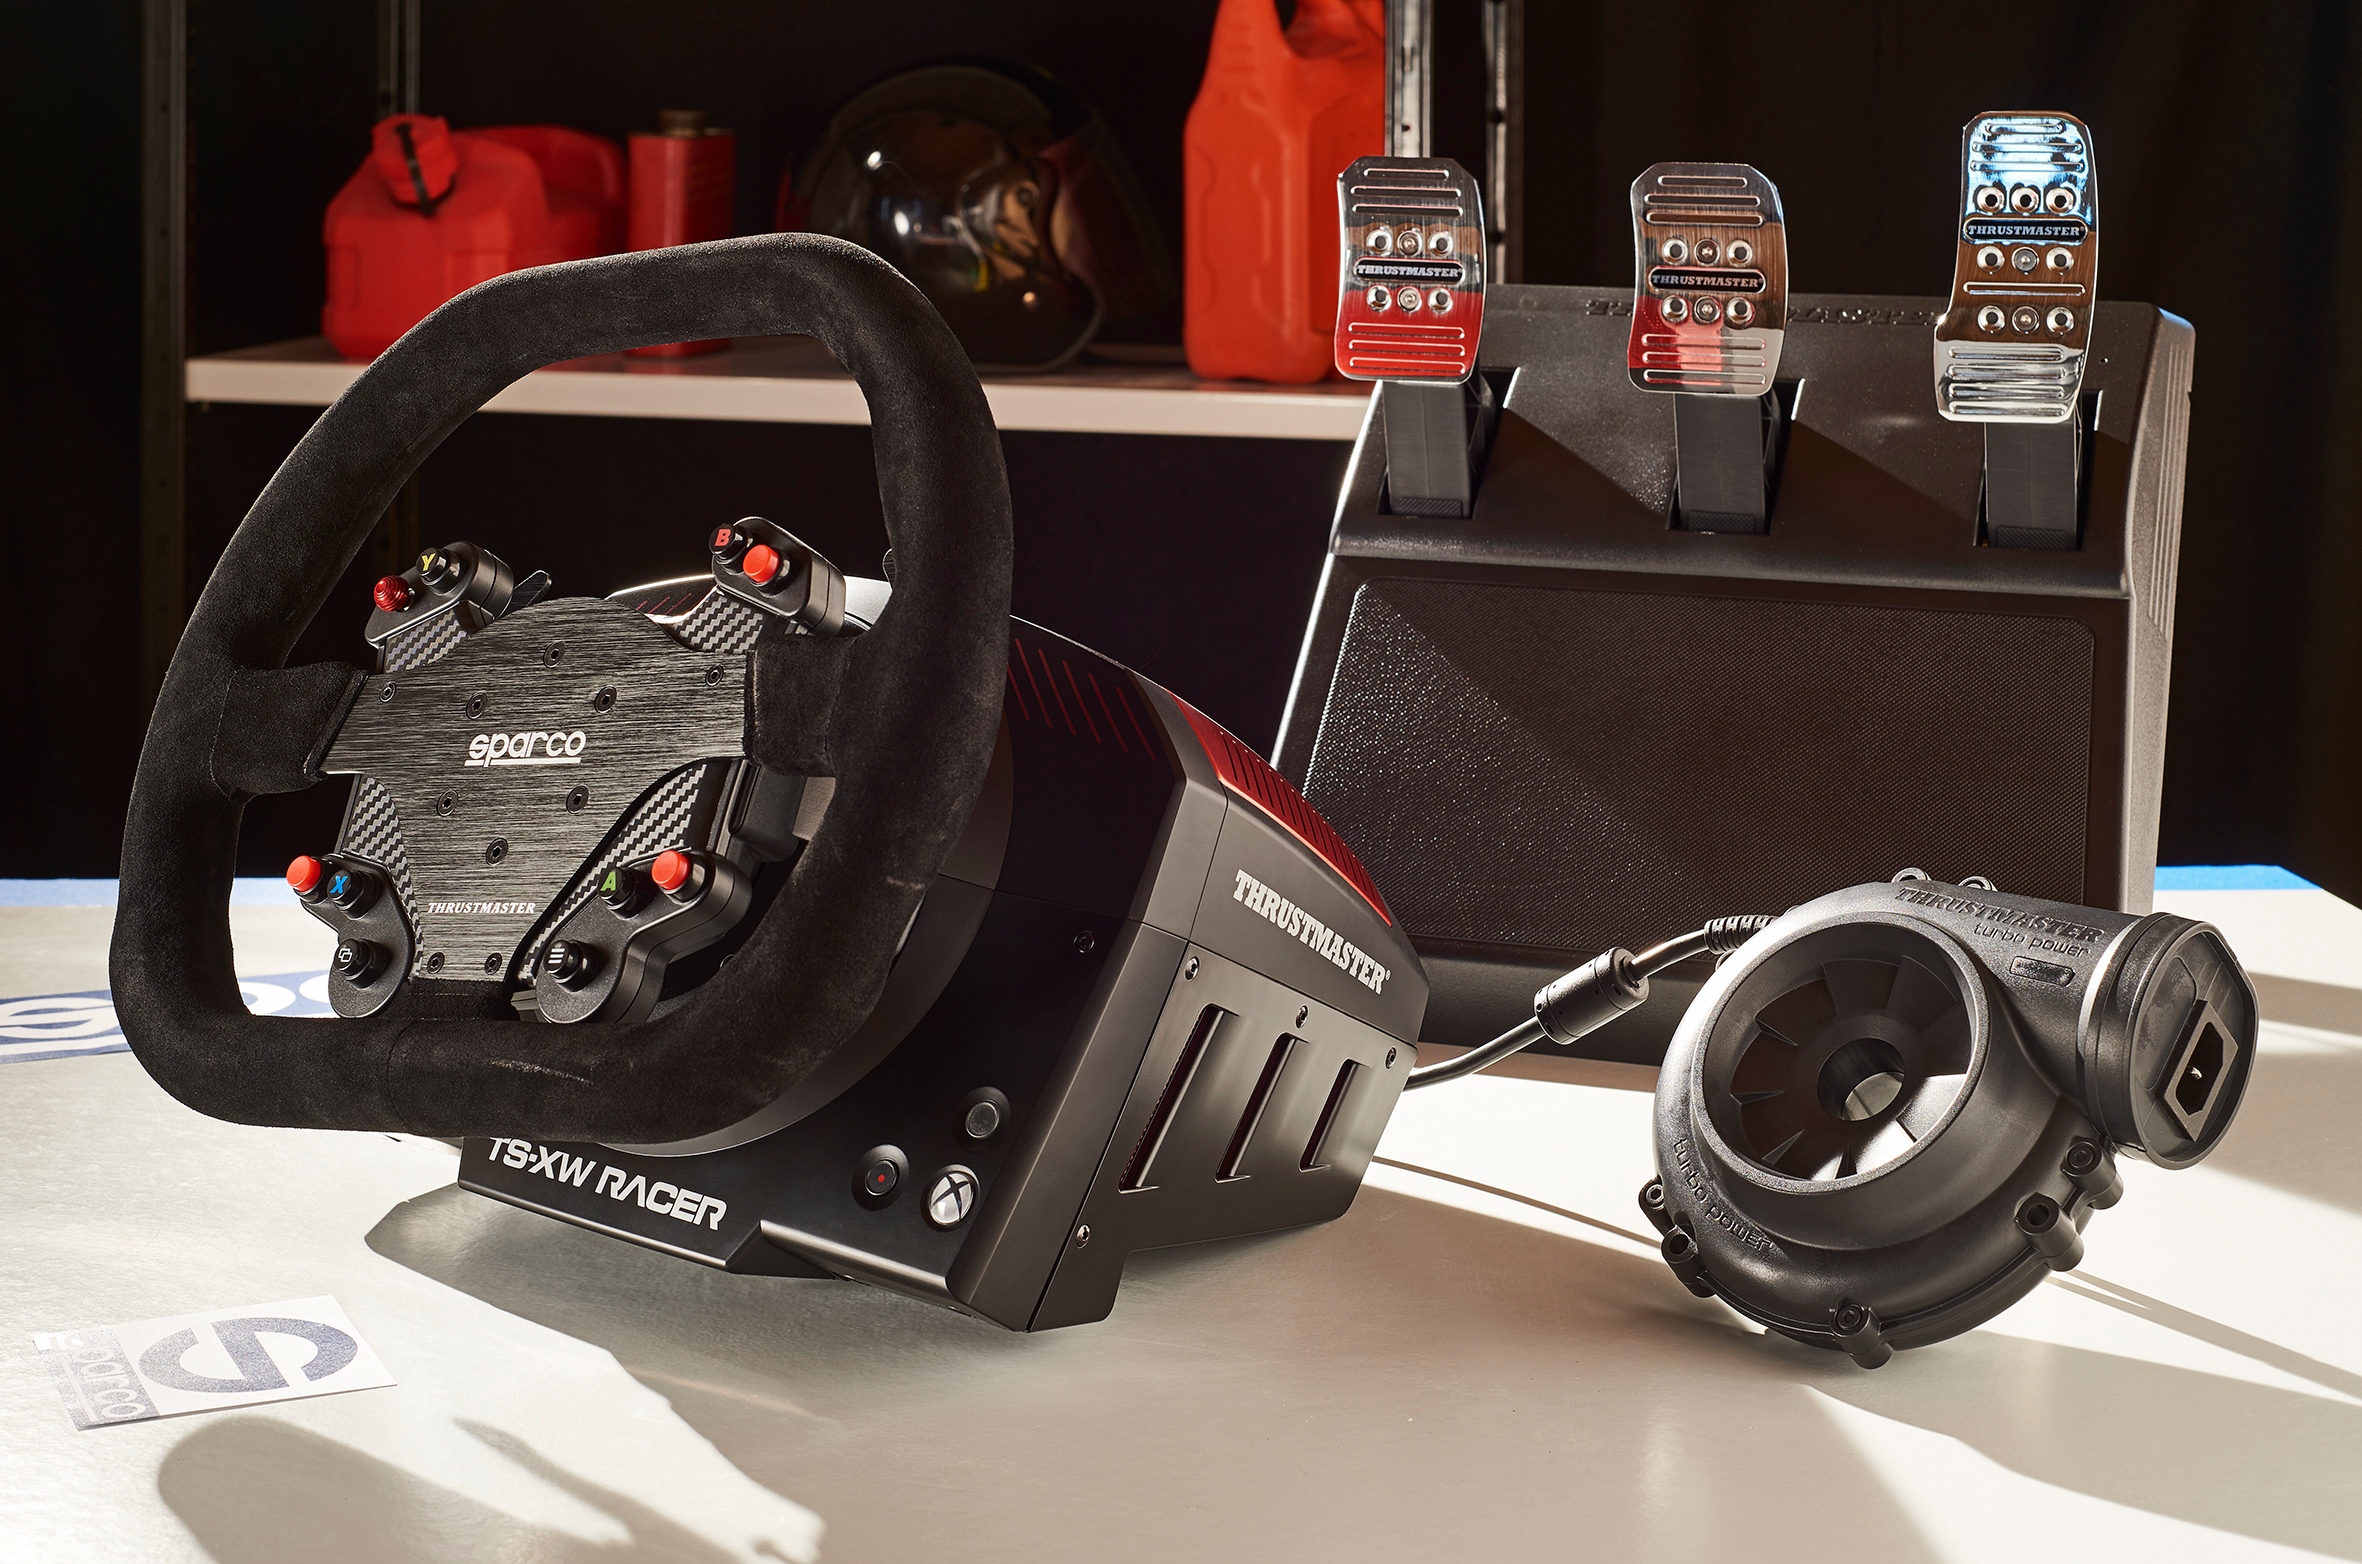 Volan s pedalama Thrustmaster - TS-XW Racer Sparco P310 Compet. Mod